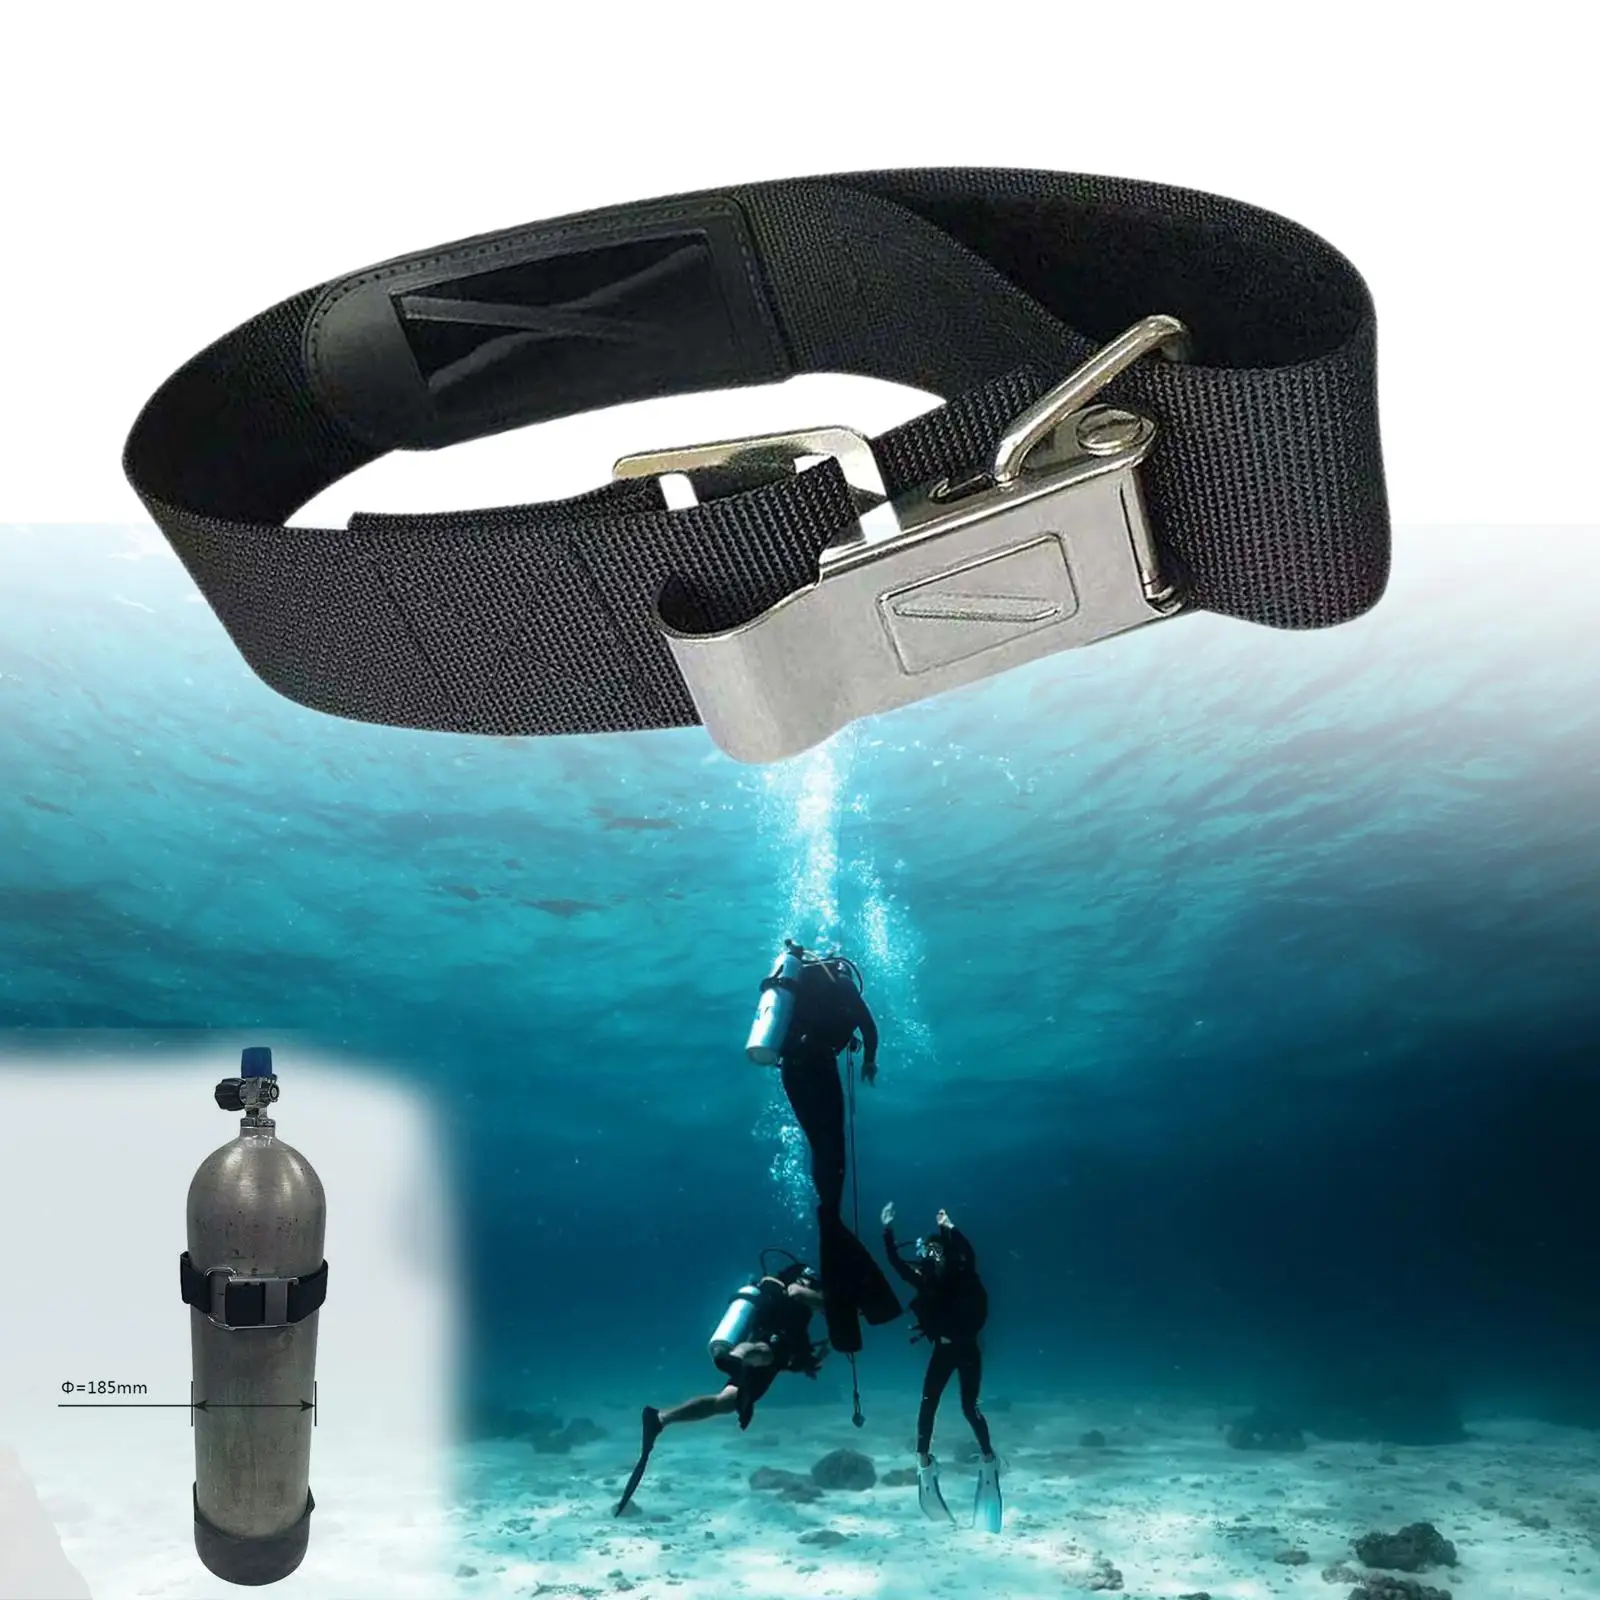 Premium Scuba Diving Tank Band BCD Tank Cylinder Cam Hinge Buckle Strap Water Sport Safety Equipment Replacement Strap